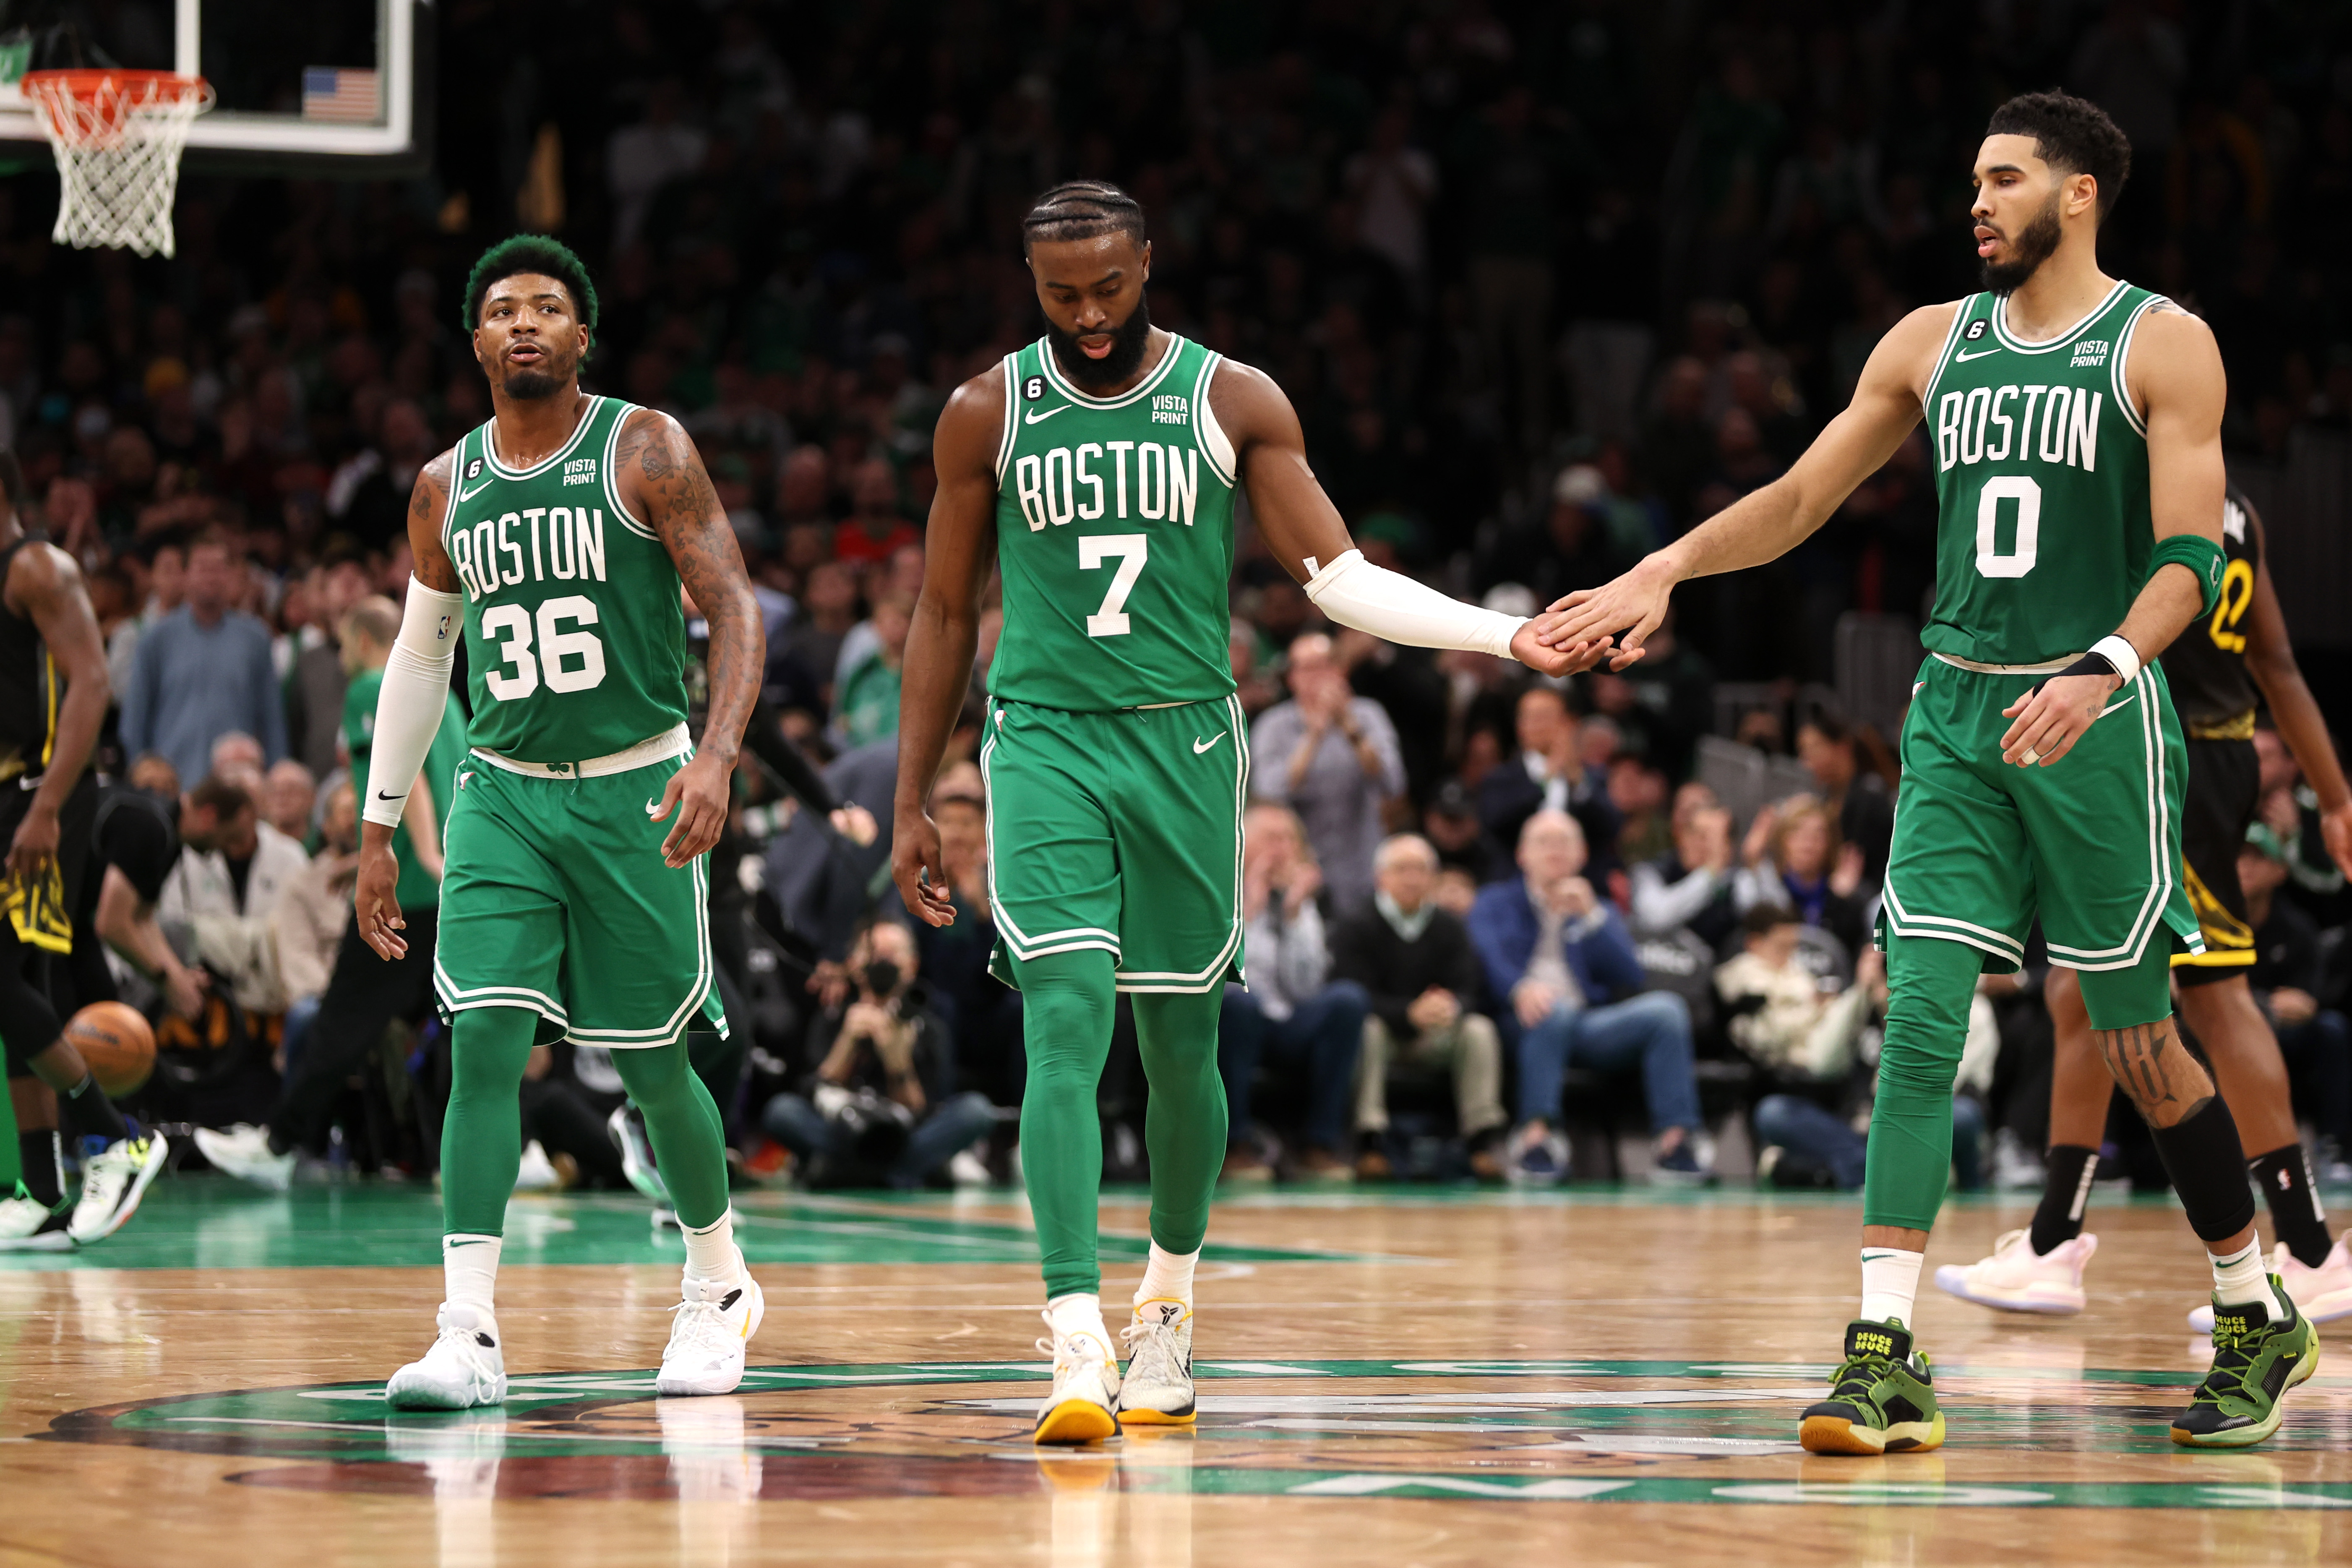 Boston's Jayson Tatum comes in 4th in 1st 2022 fan All-Star voting returns;  Jaylen Brown yet to register in top-10